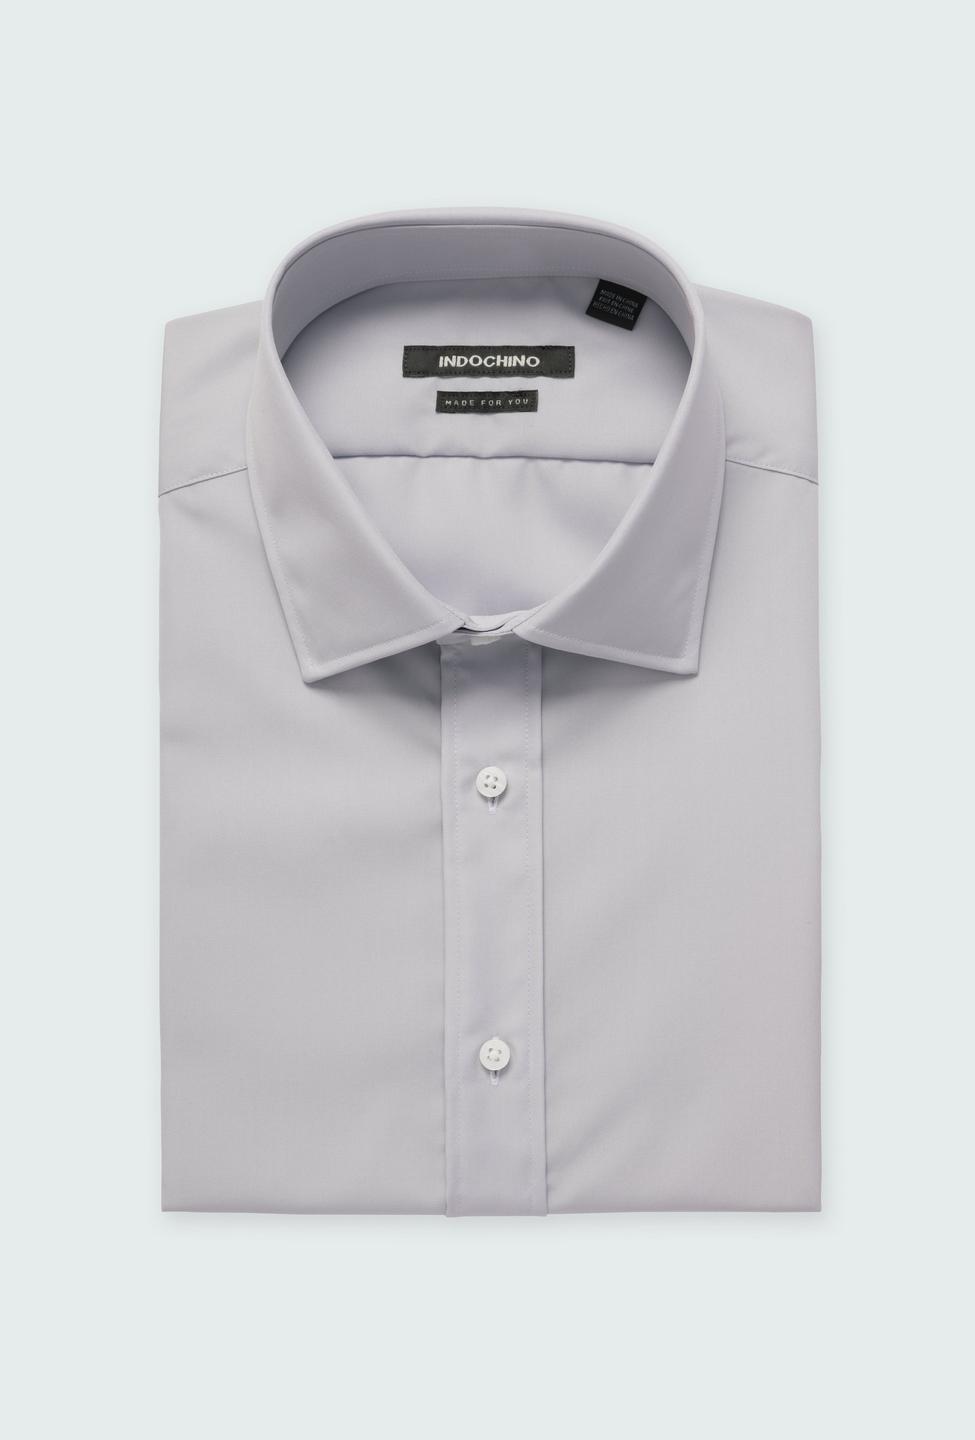 Gray shirt - Helston Solid Design from Premium Indochino Collection